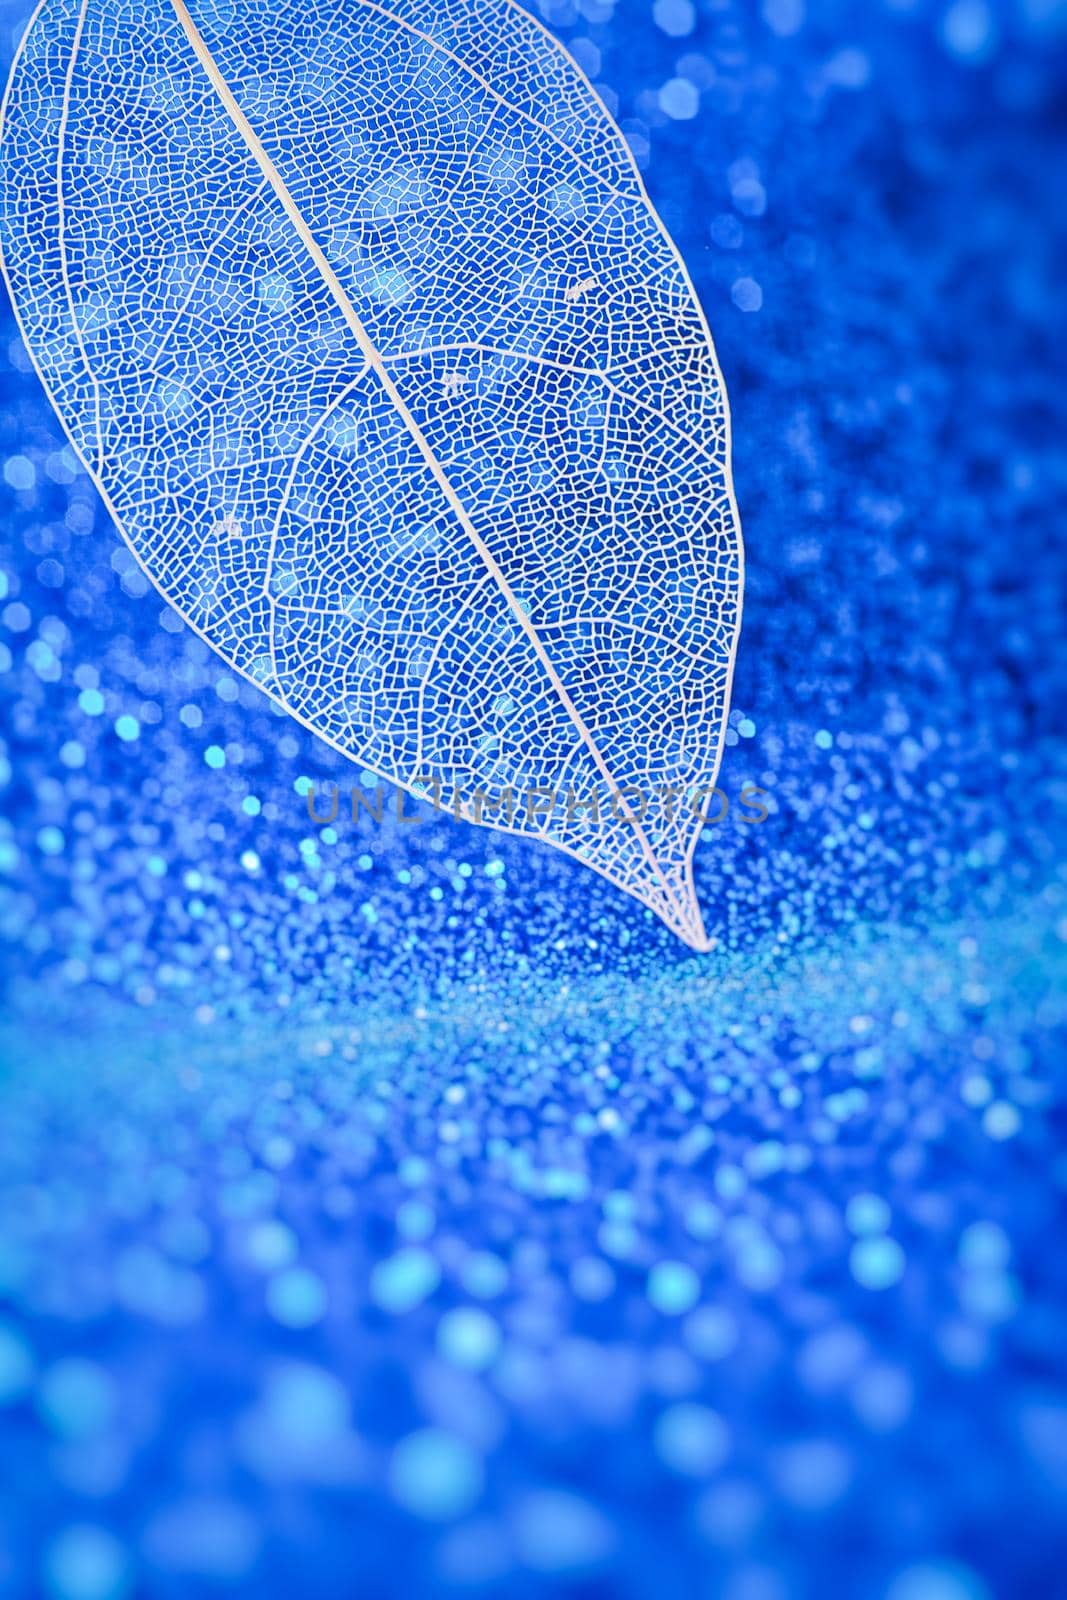 Expressive artistic image of beauty and purity of nature. Beautiful white skeletonized leaf on light blue background with round bokeh. by Maximusnd